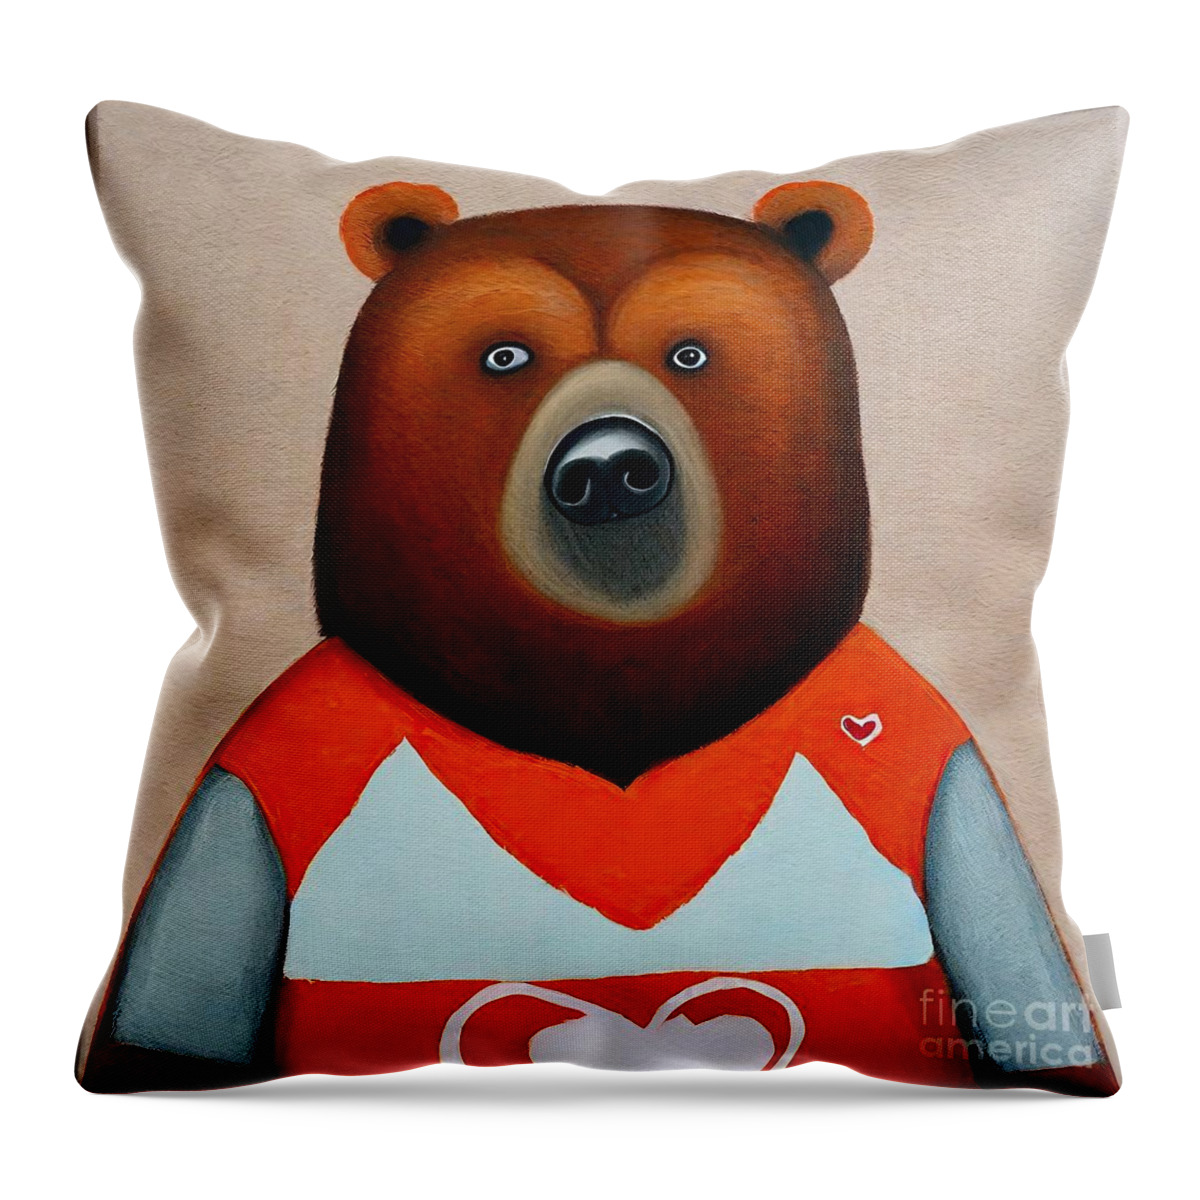 Bear Throw Pillow featuring the painting Painting A Tender Bear bear illustration cute toy by N Akkash